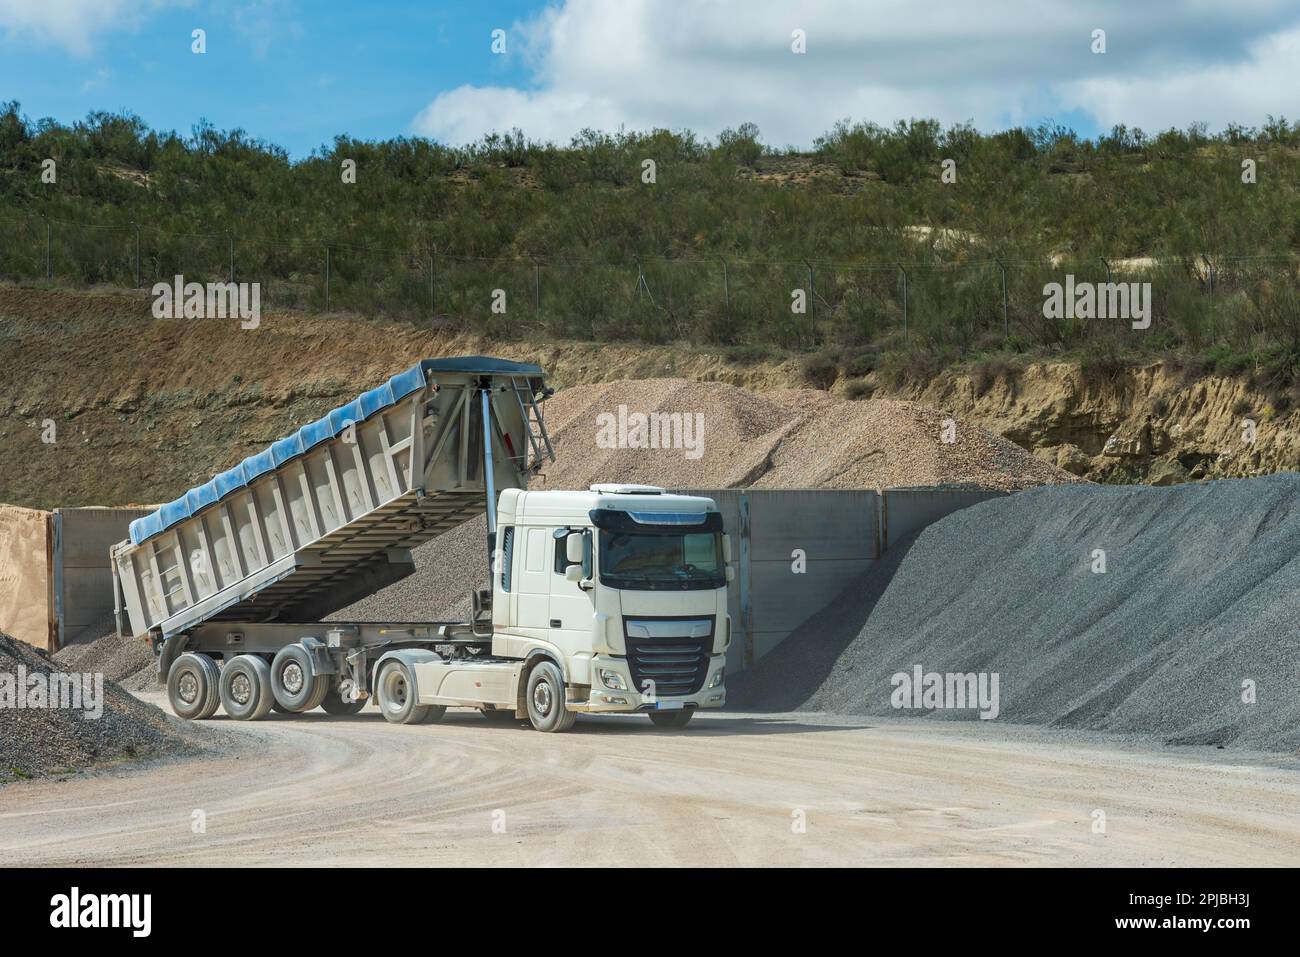 Truck in an aggregate quarry with the dump raised after download. Stock Photo